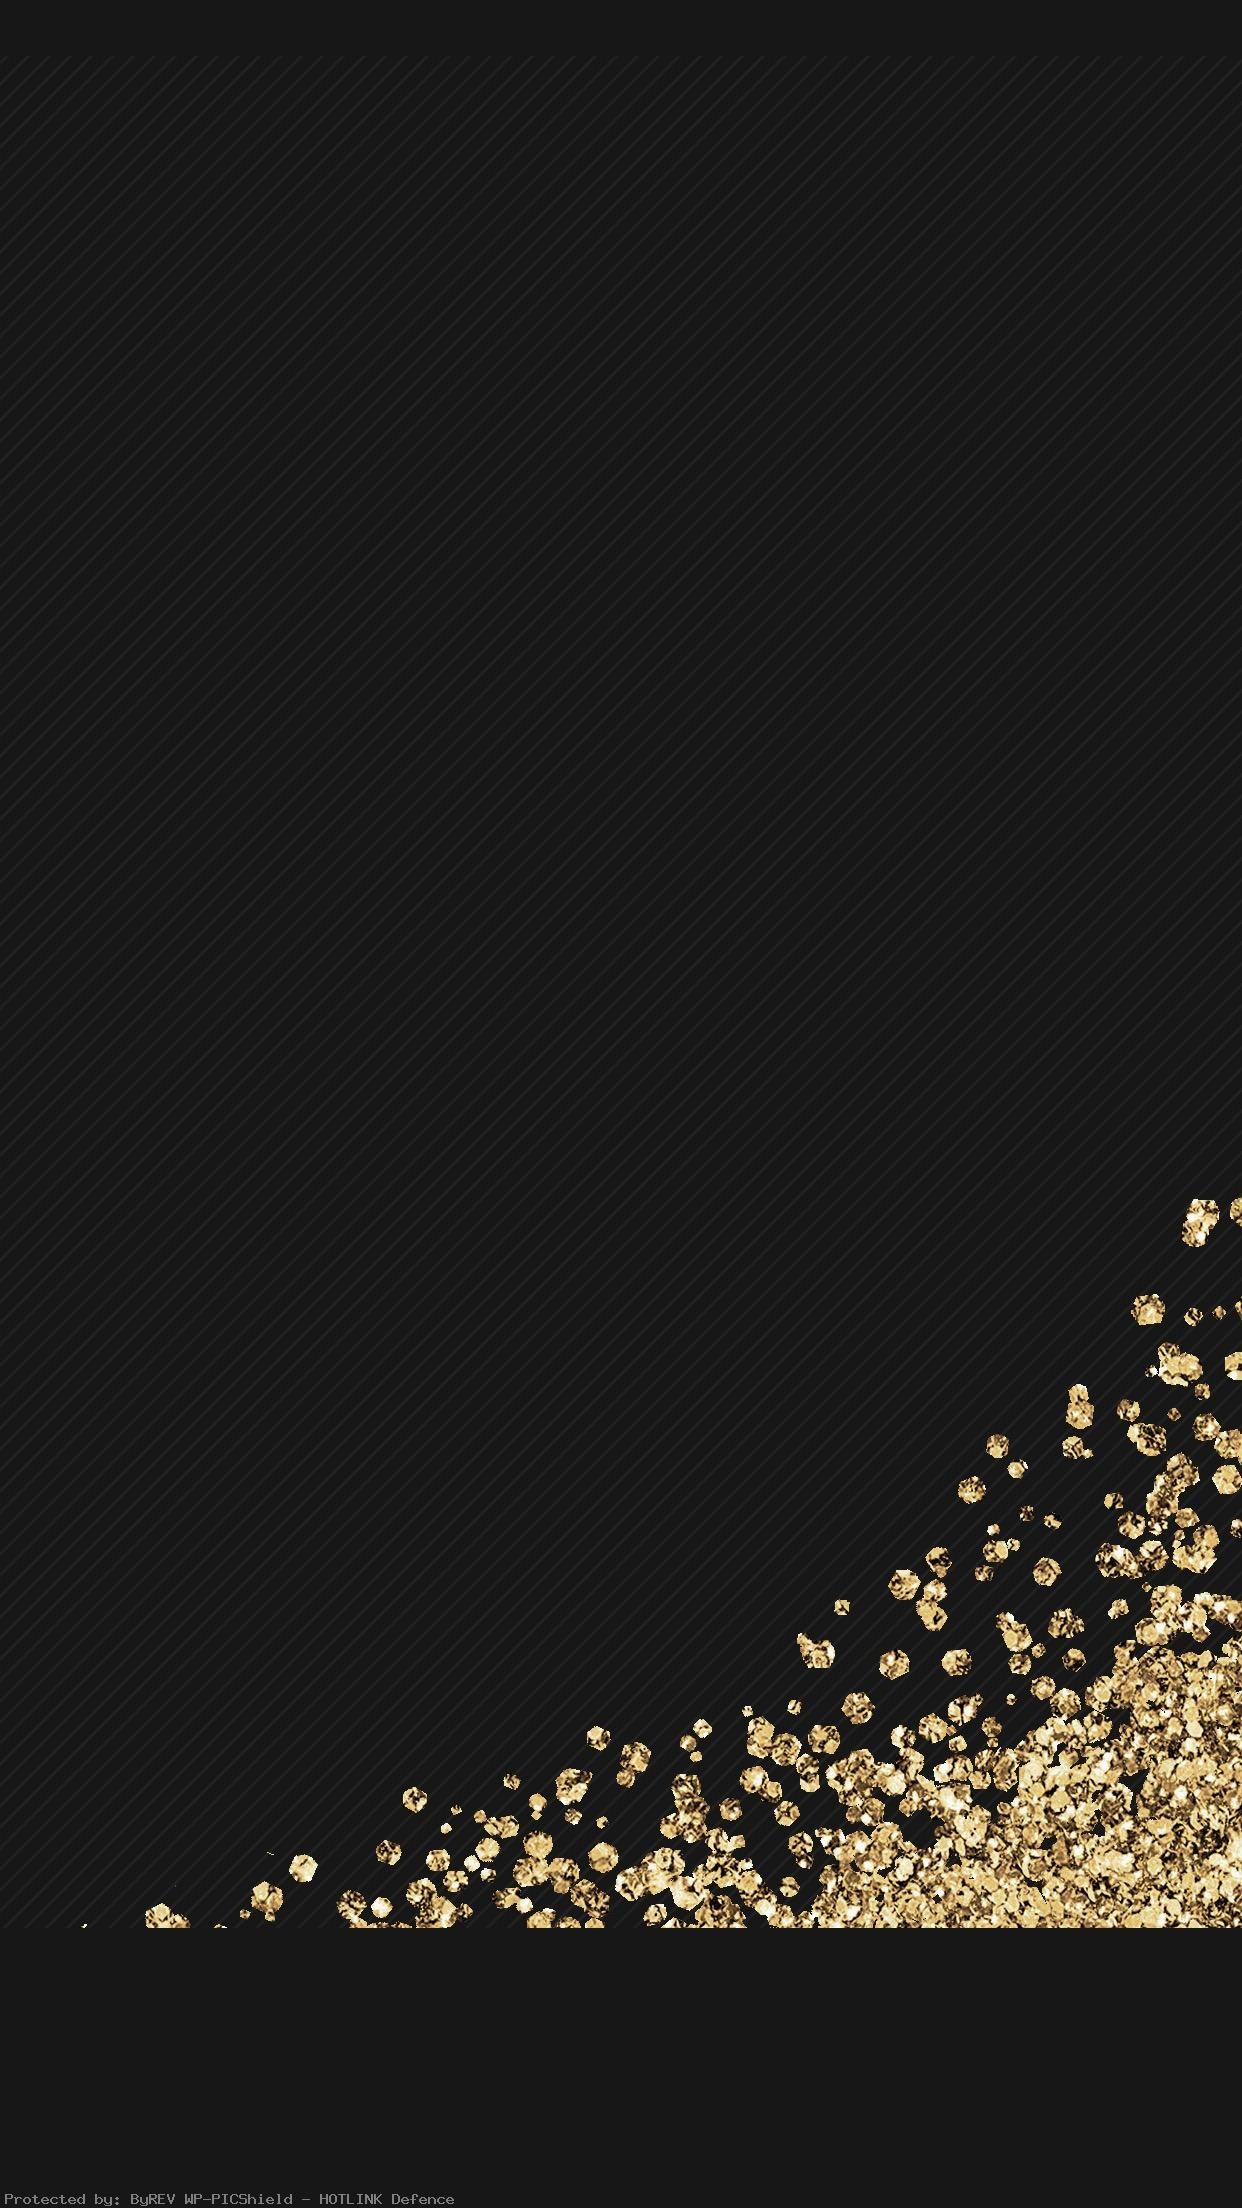 Black and Gold iPhone Wallpaper (72+ images)